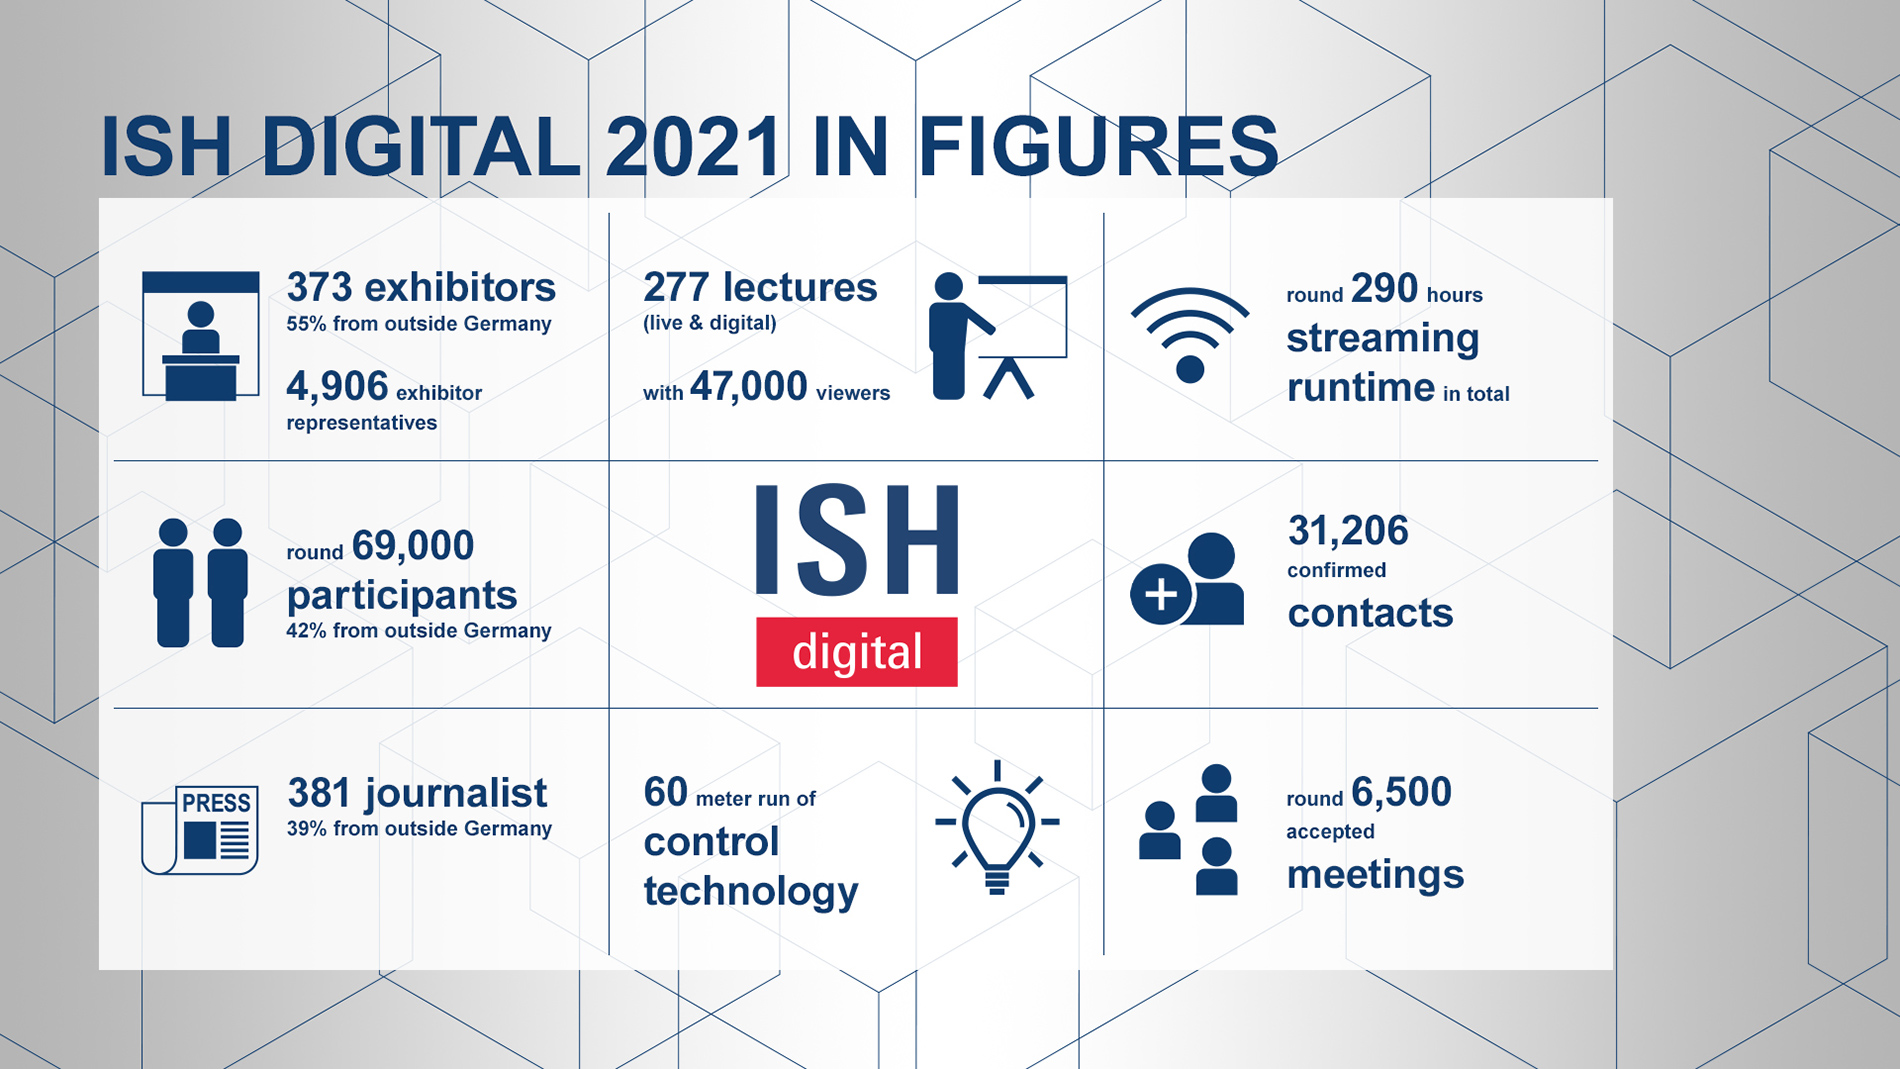 Facts and figures for ISH digital 2021 (Source: Messe Frankfurt Exhibition GmbH)